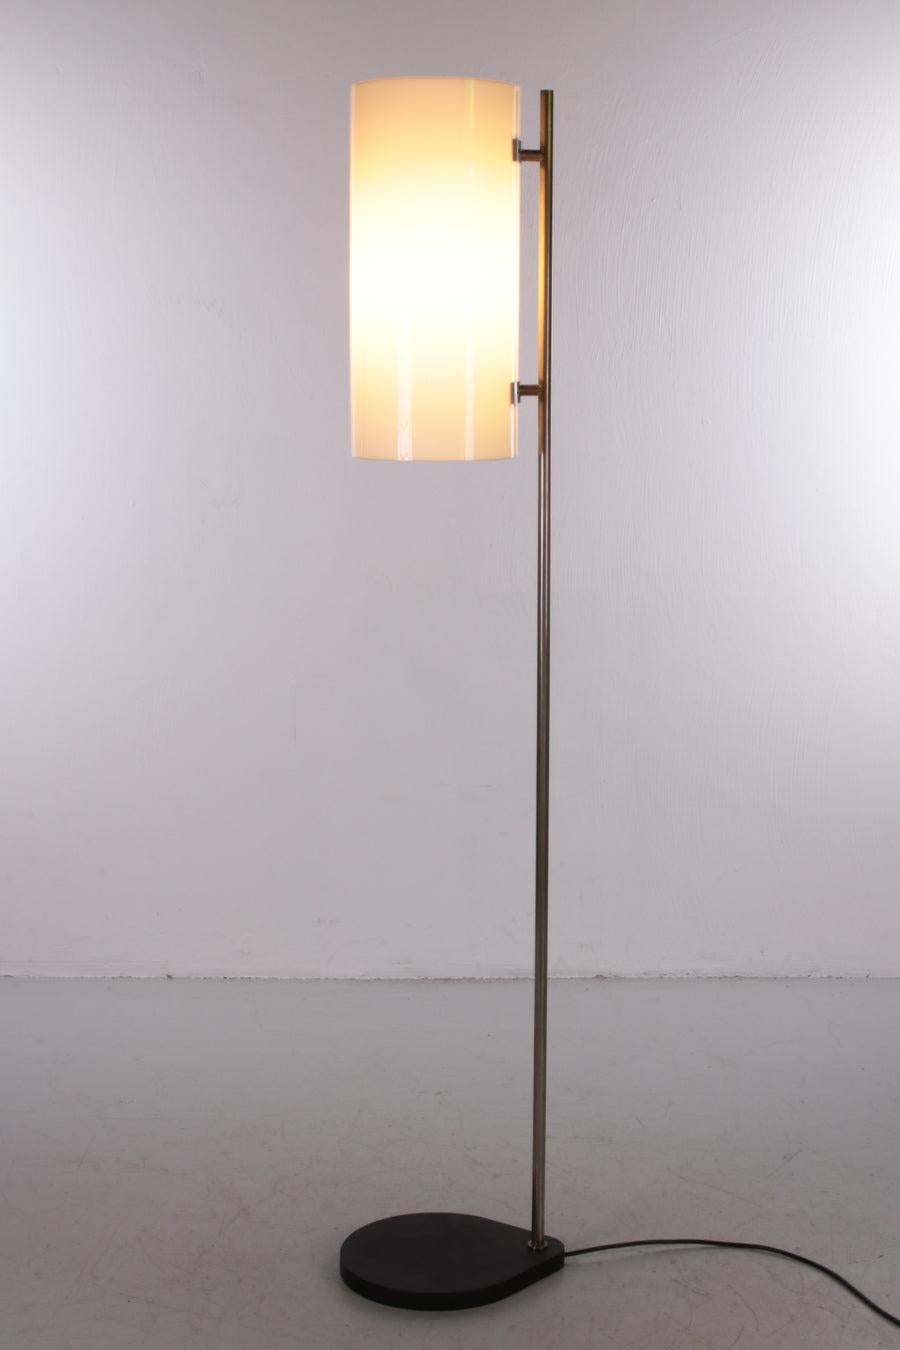 Vintage Floor lamp Danish design by Louis Poulssen years 50s
Vintage floor lamp Danish design by Louis Poulssen 1950s


This lamp is very special, presumably Louis Poulssen from the 1950s.

The lamps were once specially designed for the hospital in